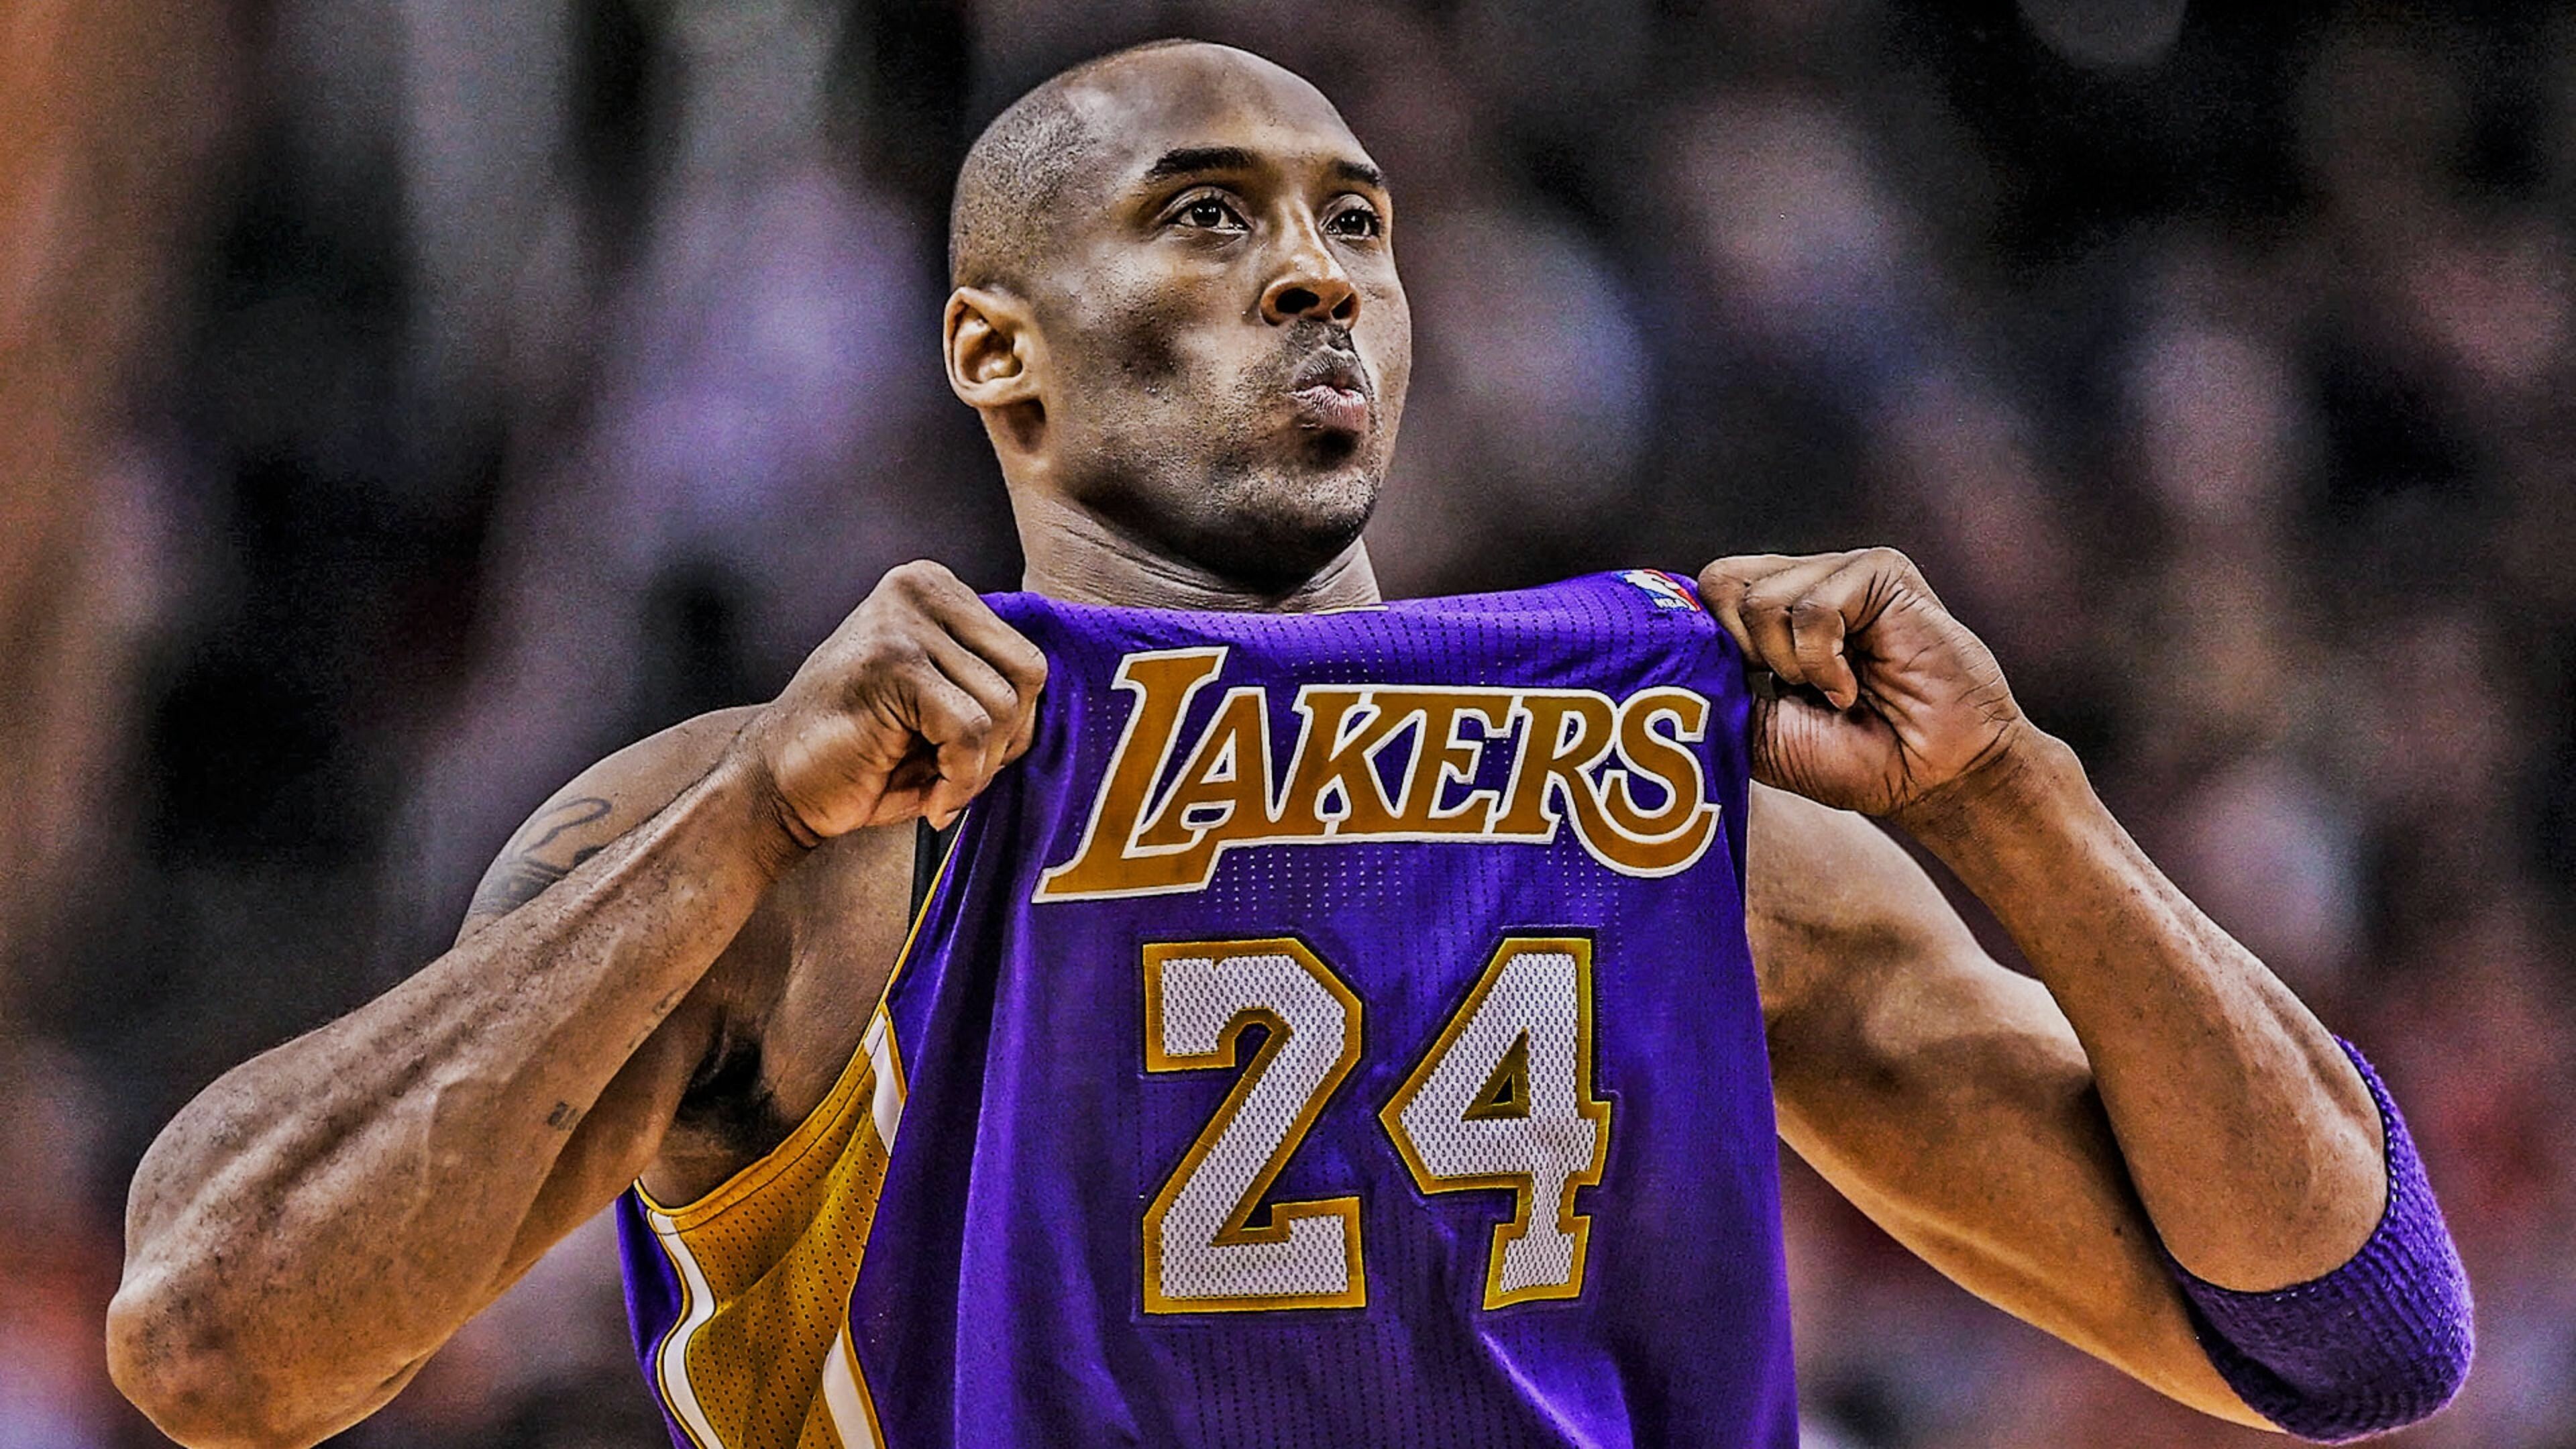 Kobe Bryant: A shooting guard, he spent his entire 20-year career with the Los Angeles Lakers. 3840x2160 4K Background.